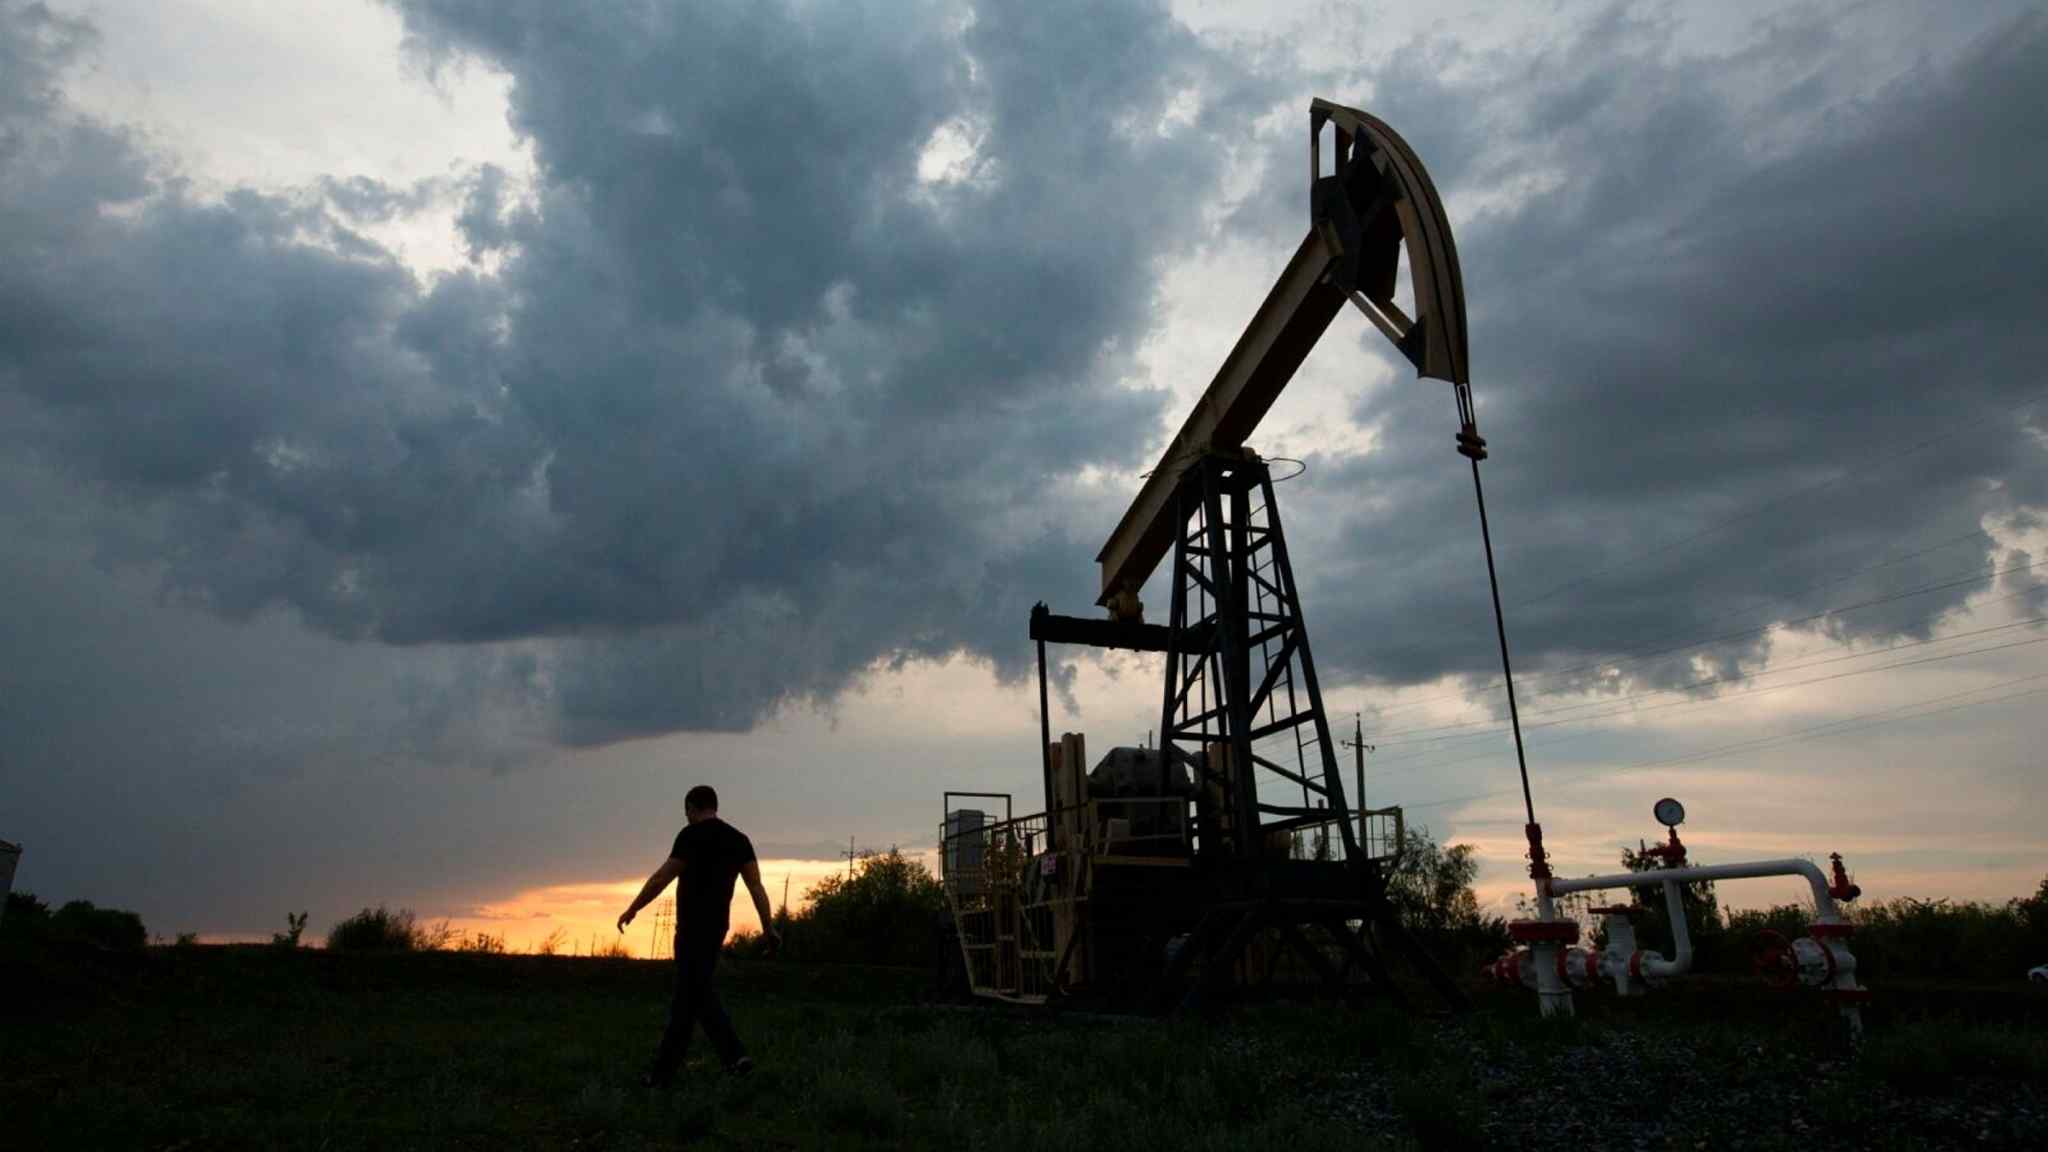 Western sanctions have had ‘limited impact’ on Russian oil output, says IEA